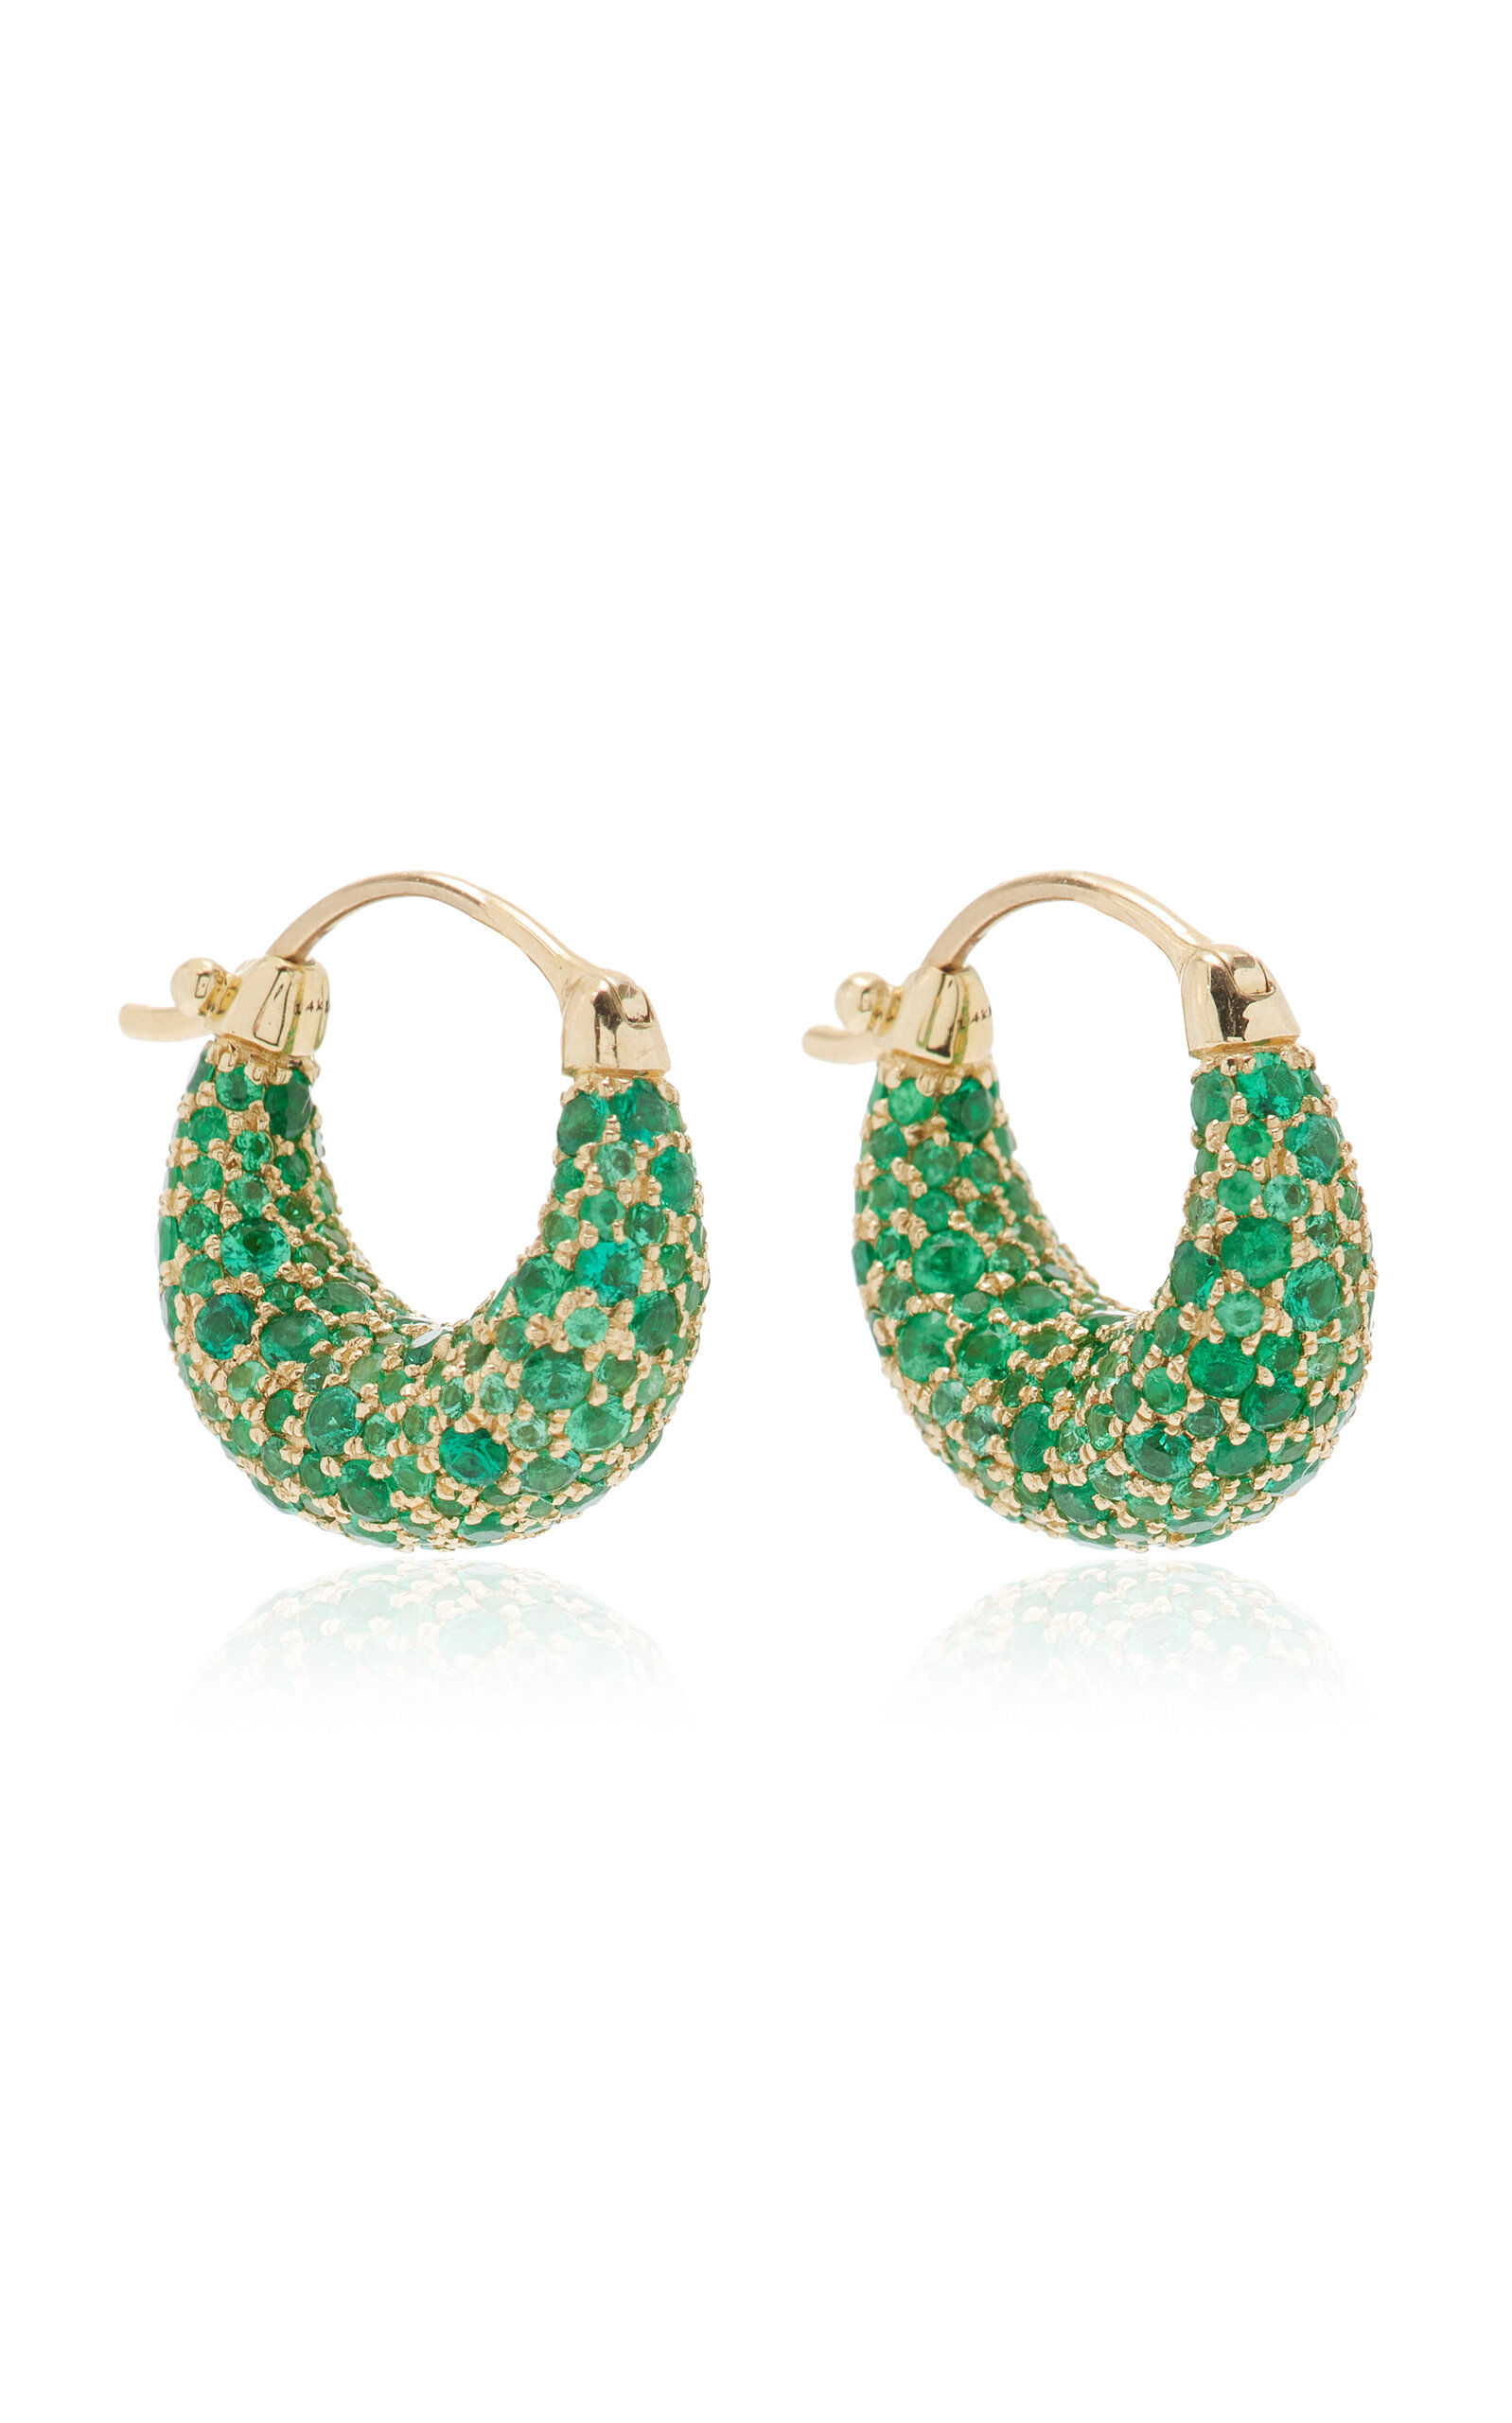 Jane Taylor Sugar Dipped 14k Yellow Gold Emerald Hoops In Green